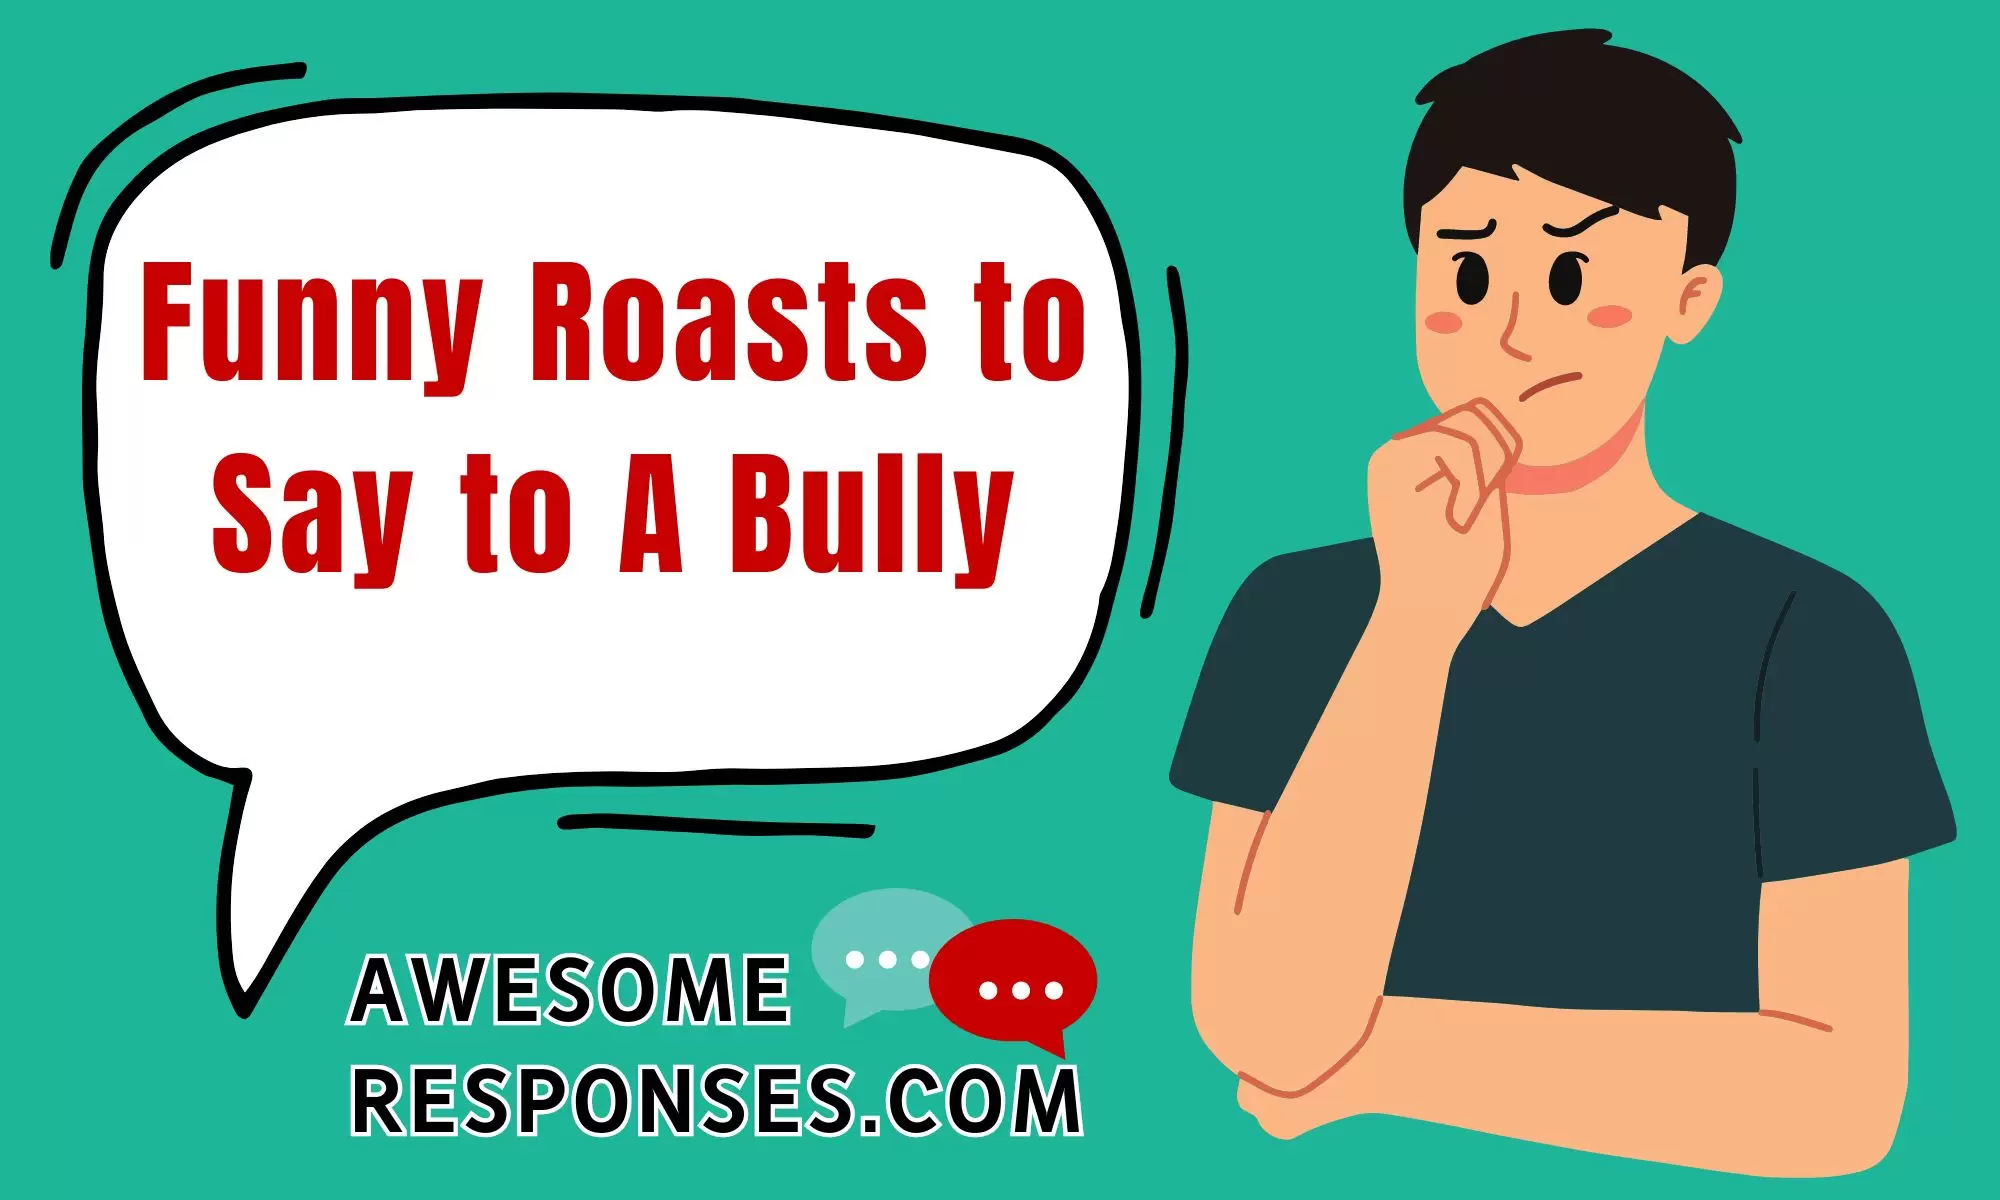 Funny Roasts to Say to A Bully